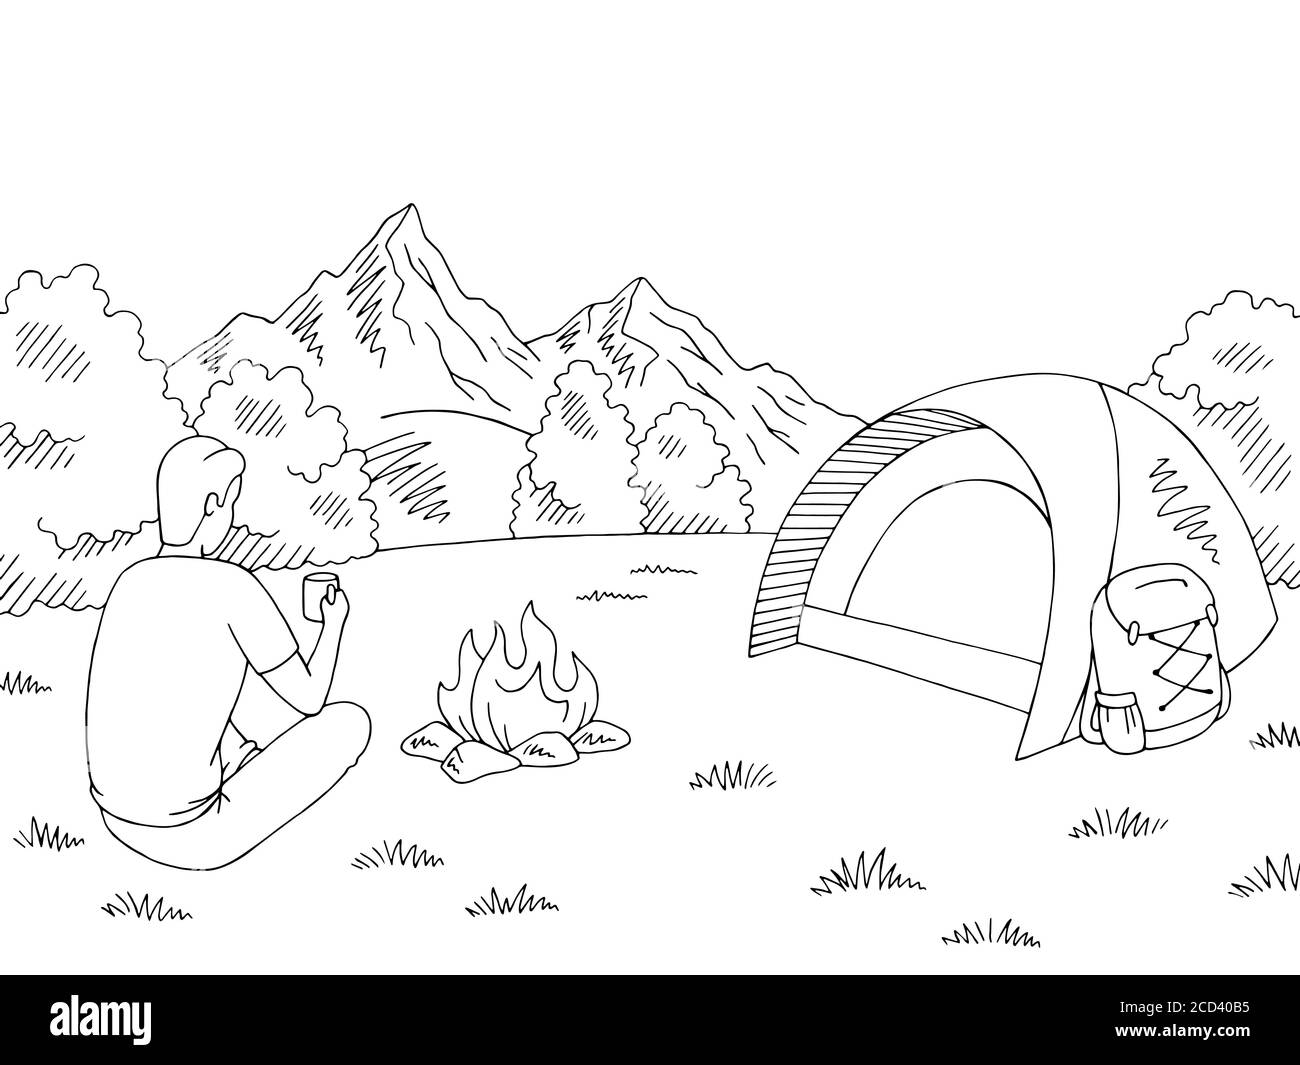 Tourist sitting near the bonfire and drinking from a cup. Camping graphic black white mountain landscape sketch illustration vector Stock Vector